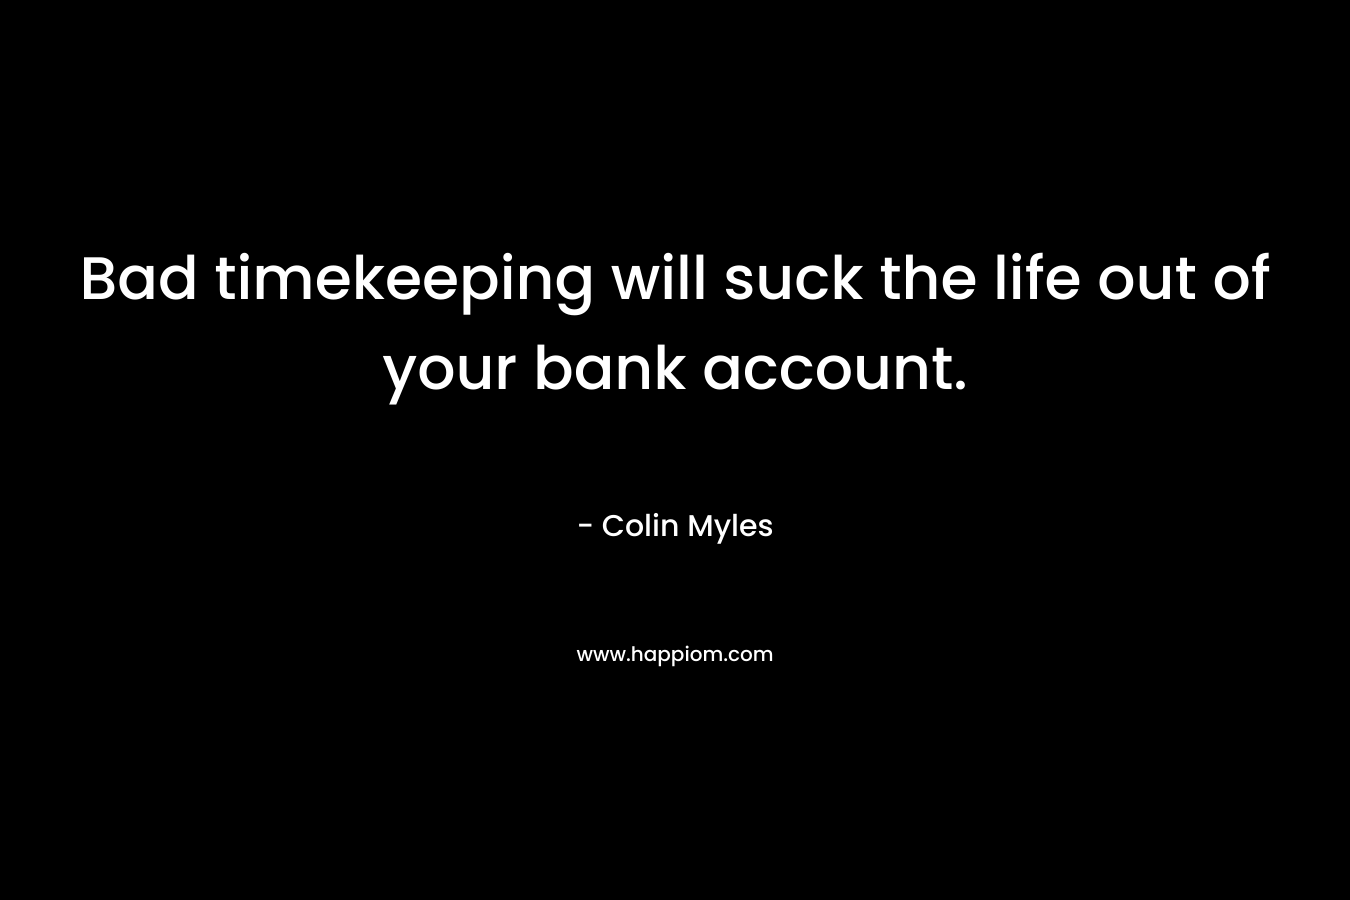 Bad timekeeping will suck the life out of your bank account.